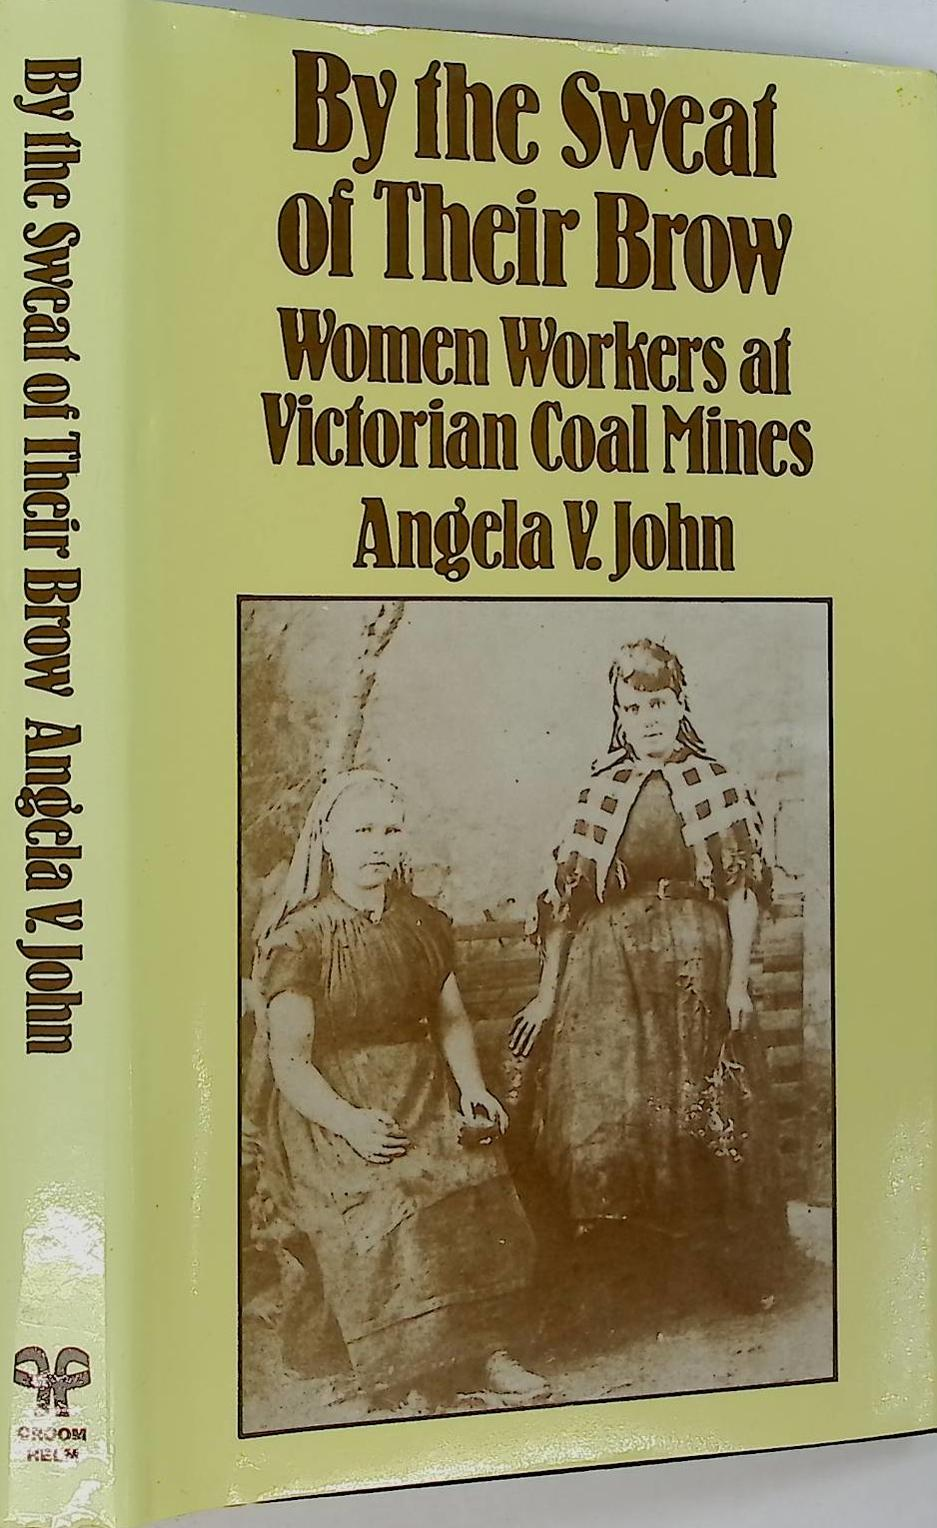 By the Sweat of Their Brow. Women Workers at Victorian Coal Mines